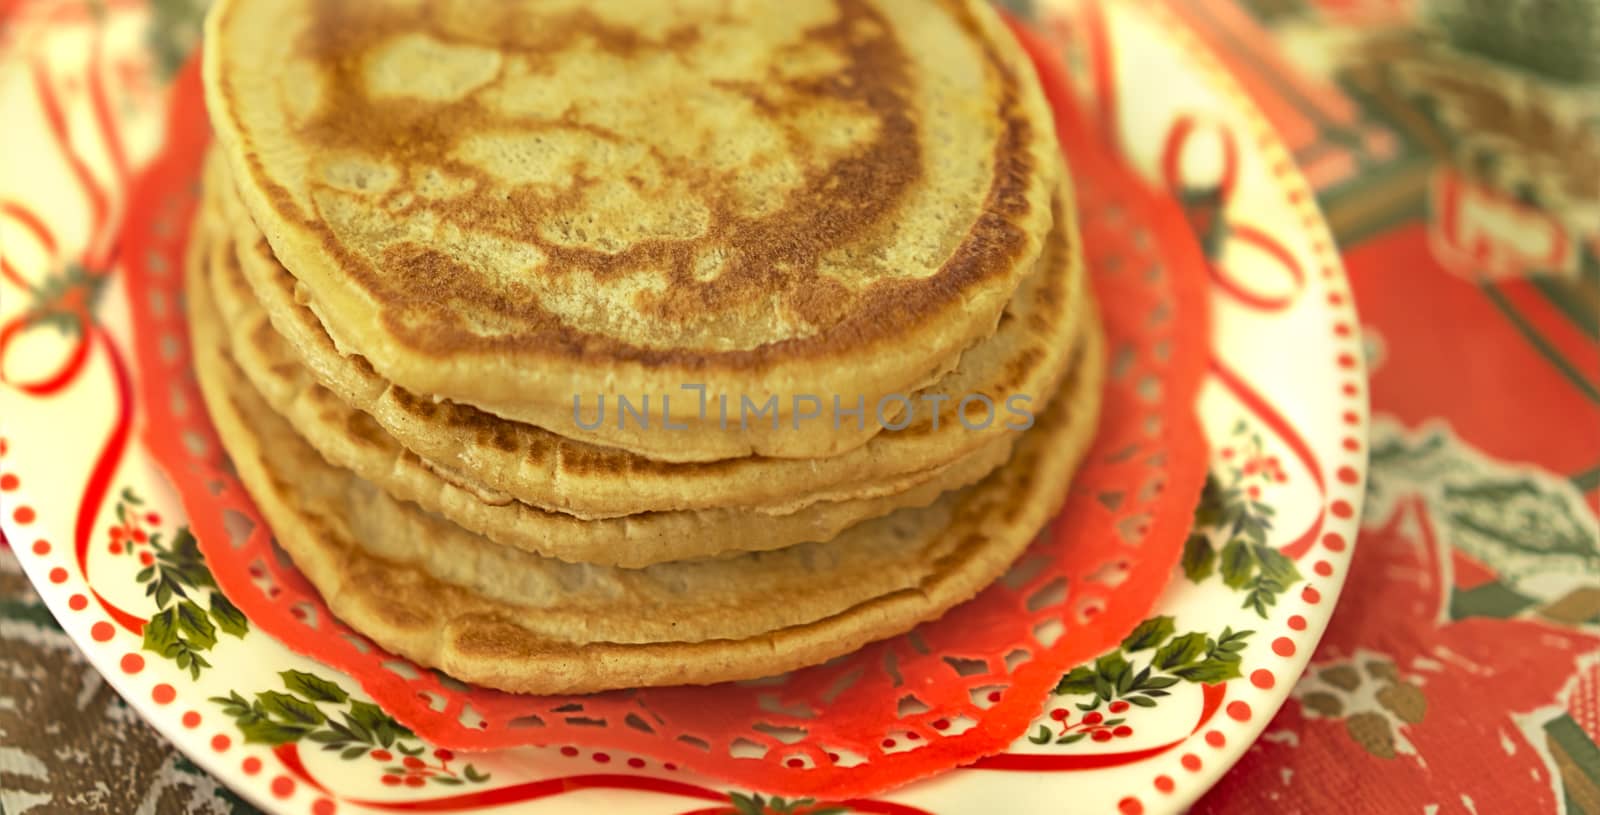 Traditional homemade pancakes by sherj